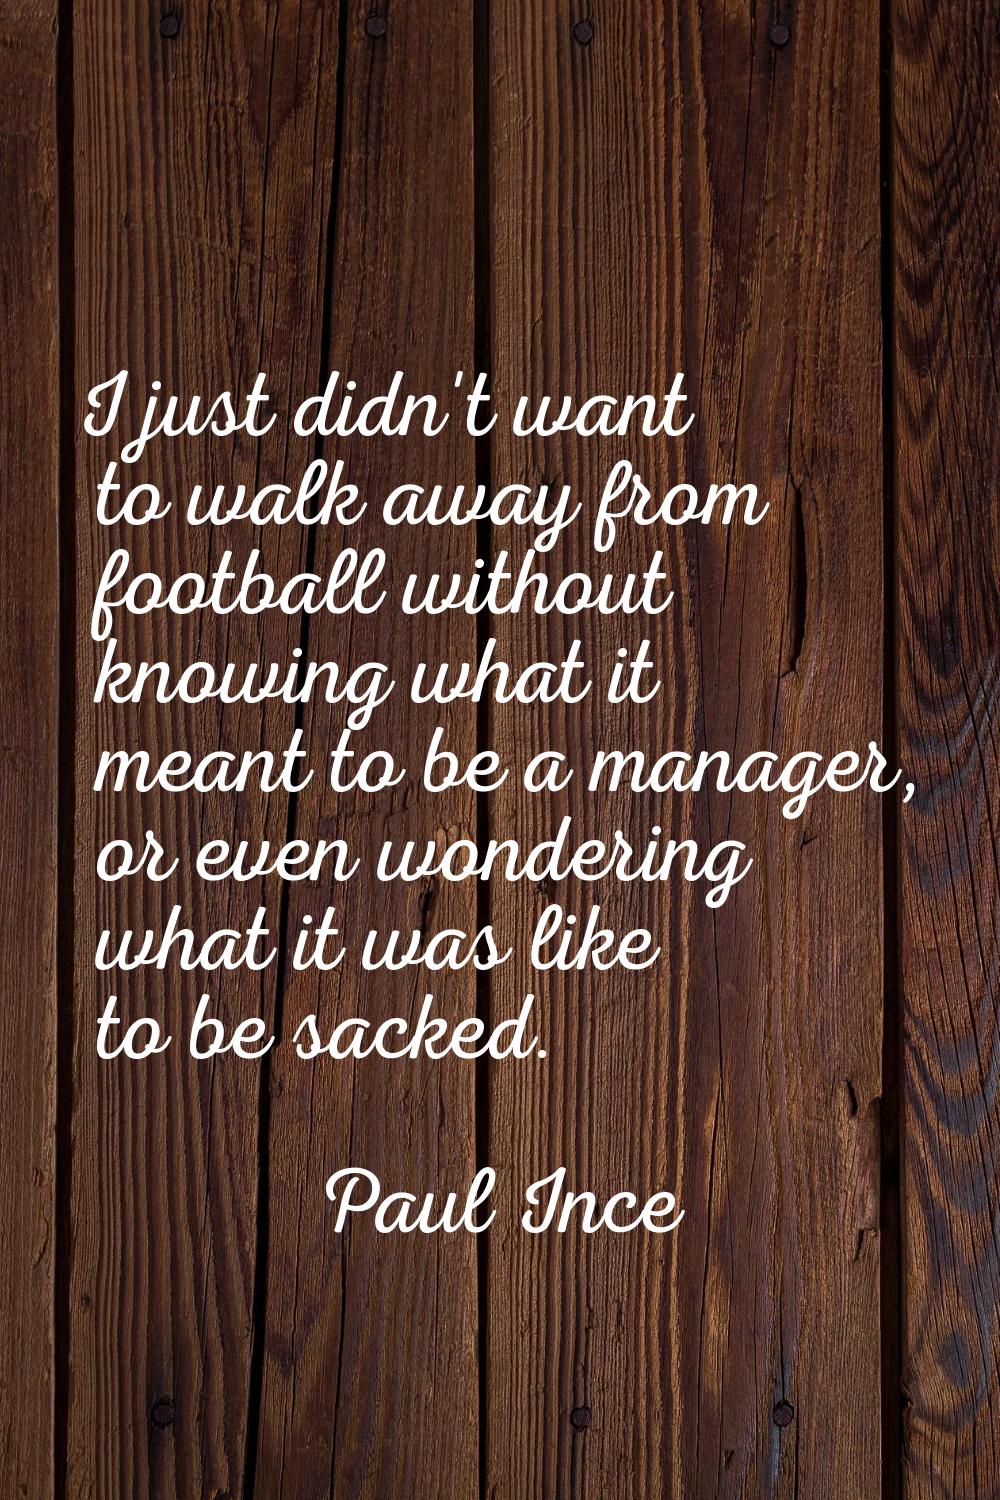 I just didn't want to walk away from football without knowing what it meant to be a manager, or eve